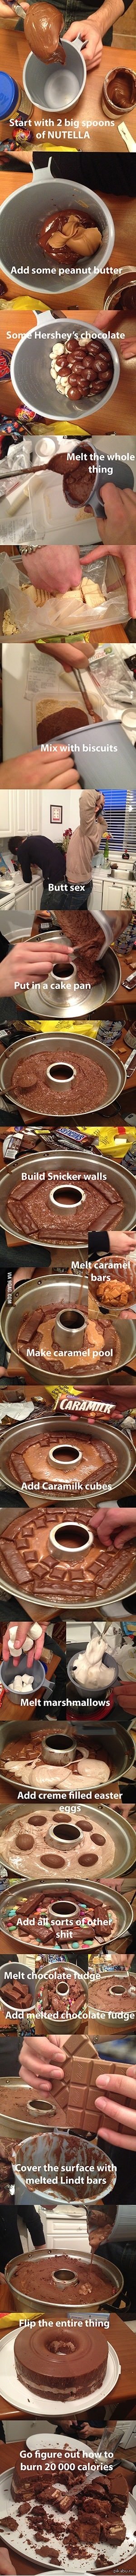 How to diabetes. . ntart with 2 g; k sh T I over the surface with ulted Limit bars Gd figure nu! Itsjust an. Remember, folks, that the butt sex is the most important part to make this recipe come out right!